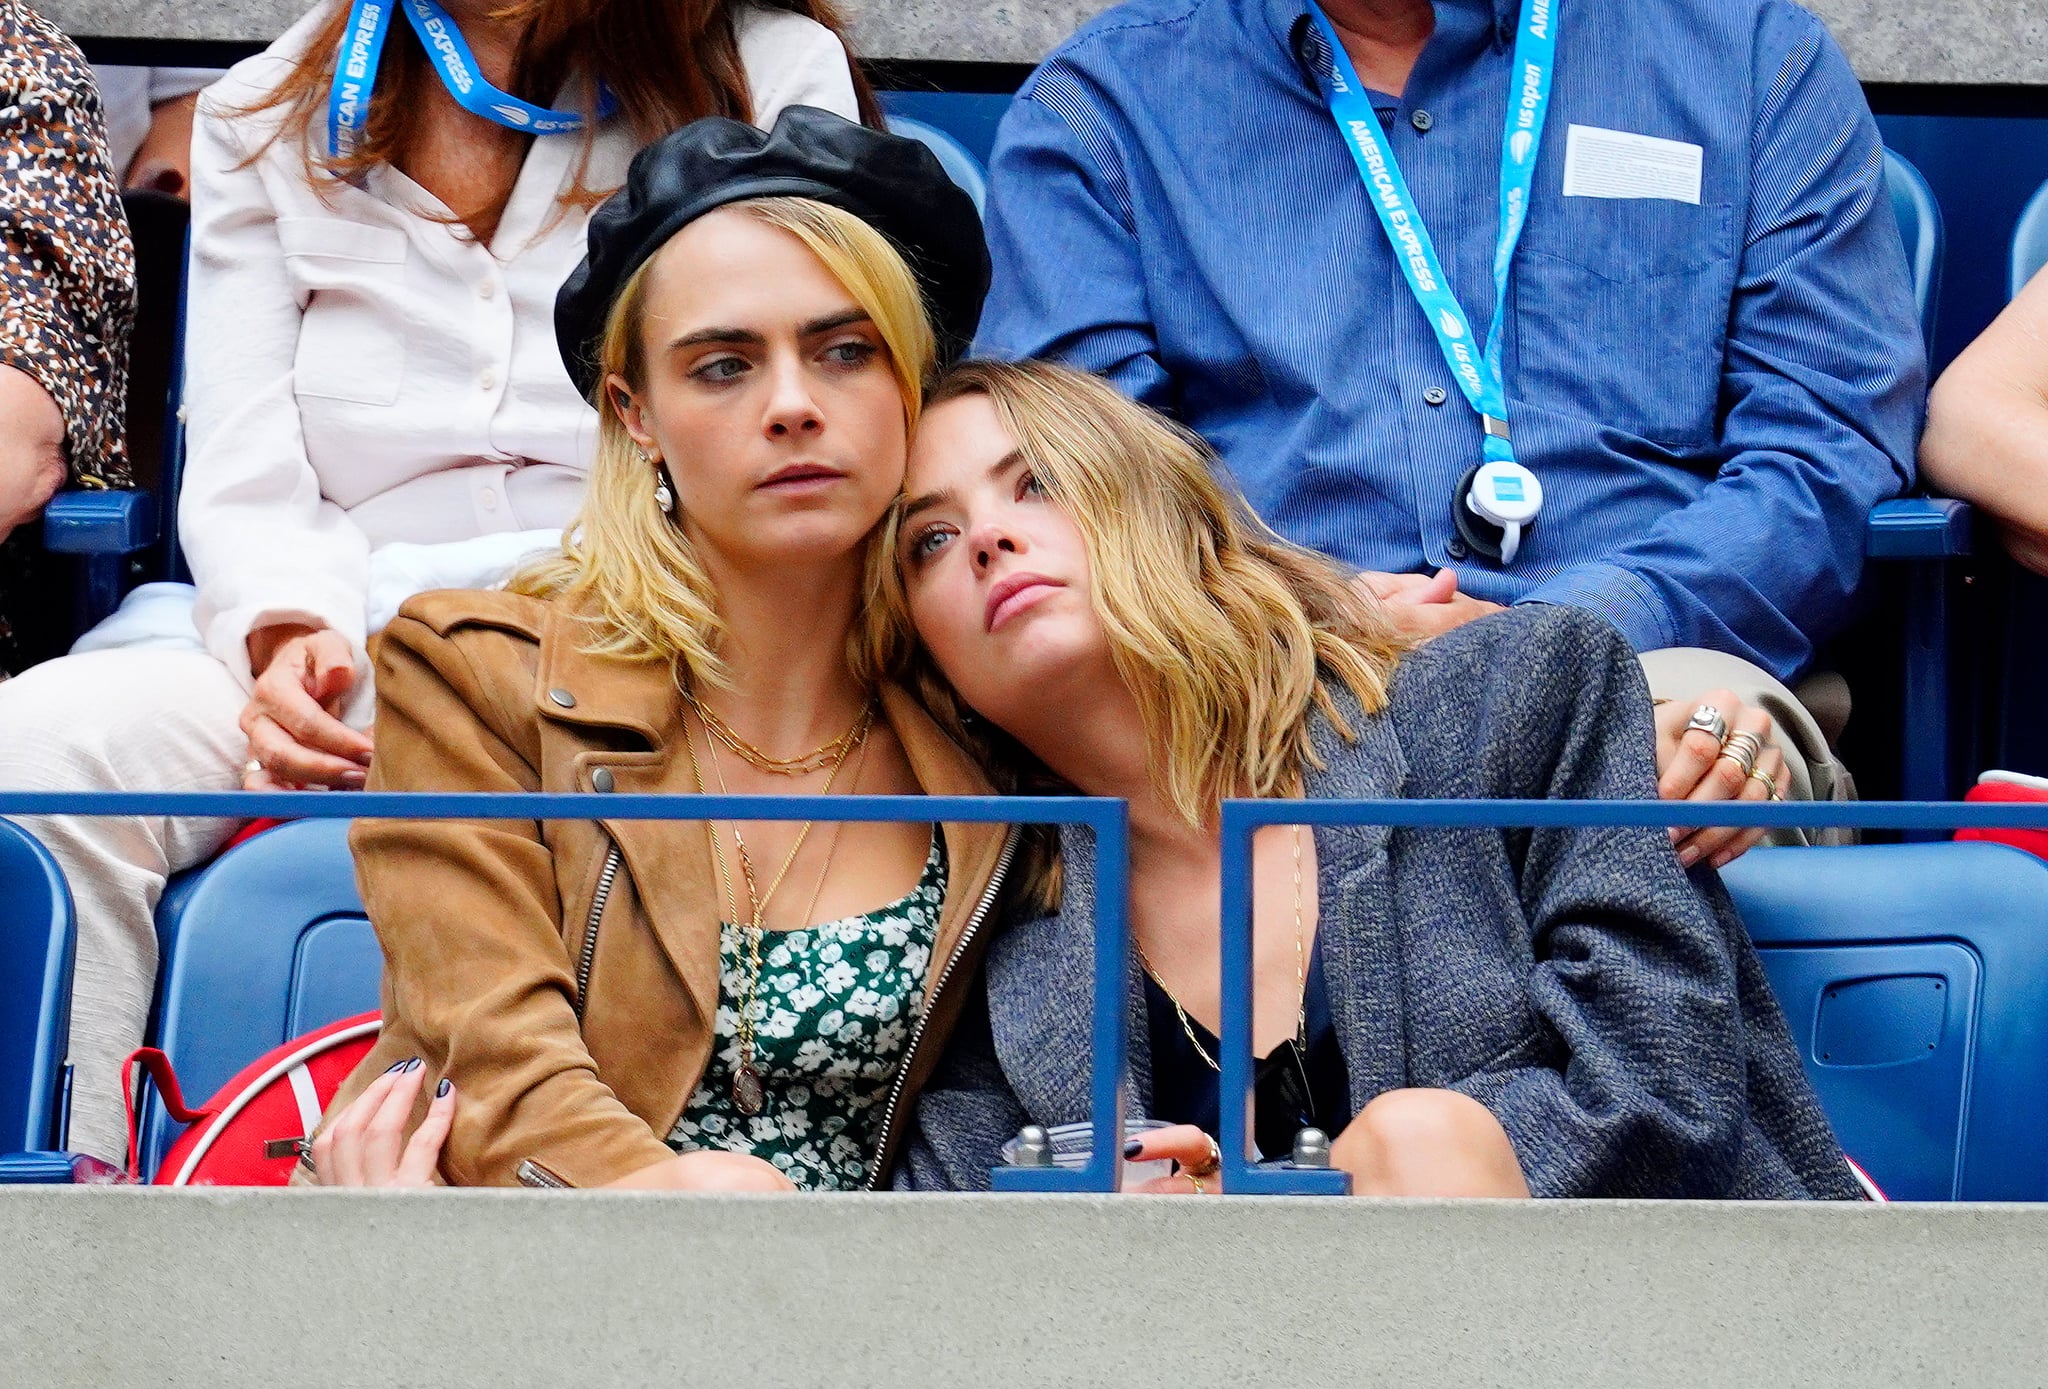 NEW YORK, NEW YORK - SEPTEMBER 07: Cara Delevingne and Ashley Benson attend the 2019 US Open Women